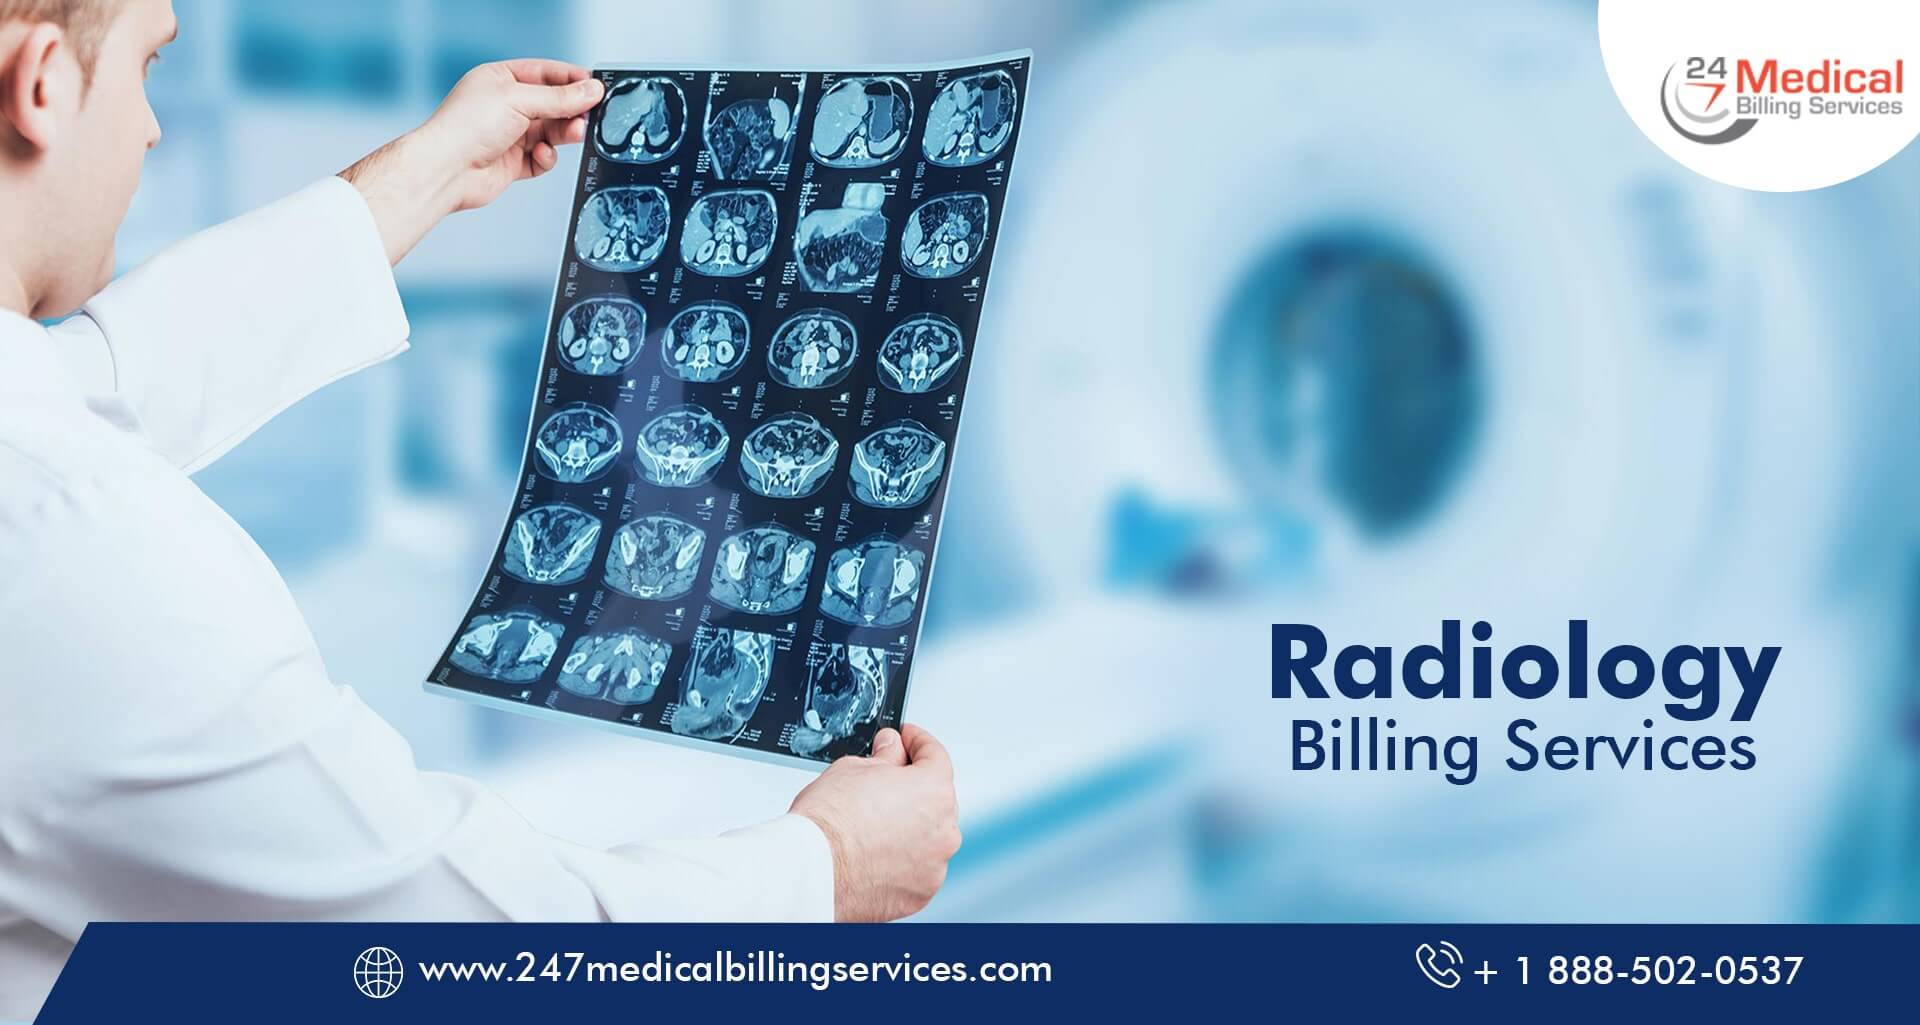  Radiology Billing Services in Akron, Ohio (OH)